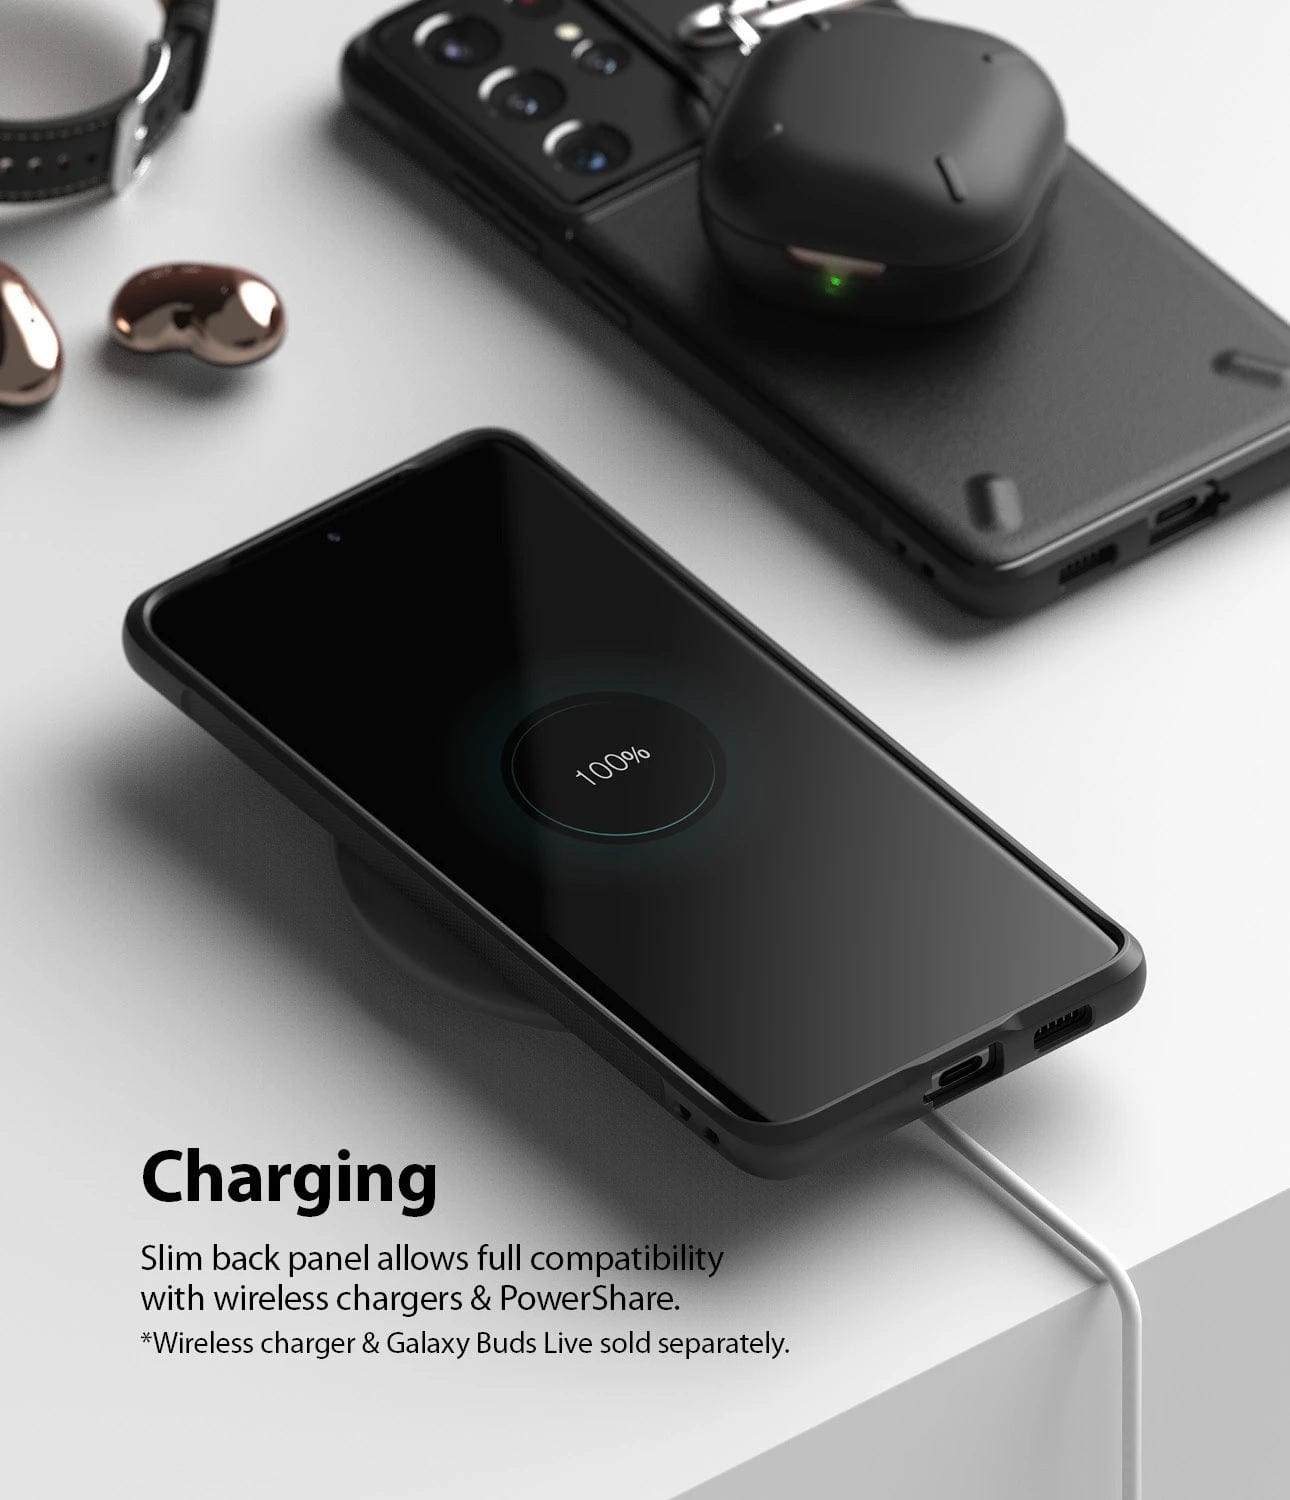 The Ringke Onyx Case supports wireless charging and is compatible with screen protectors, ensuring convenient functionality and added protection for your Galaxy S21 Ultra.